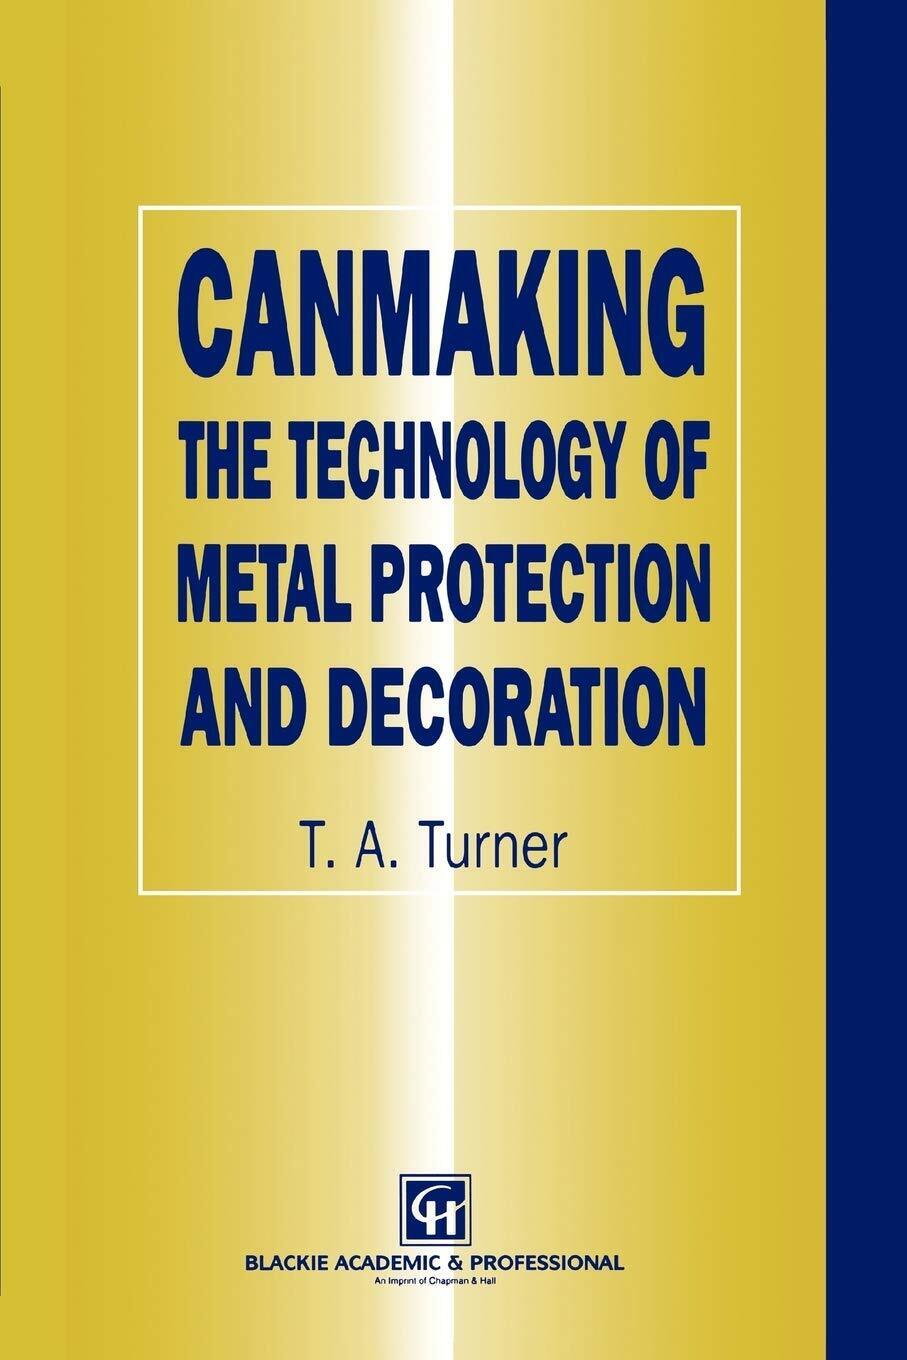 Canmaking the Technology of Metal Protection and Decoration - Springer, 2010